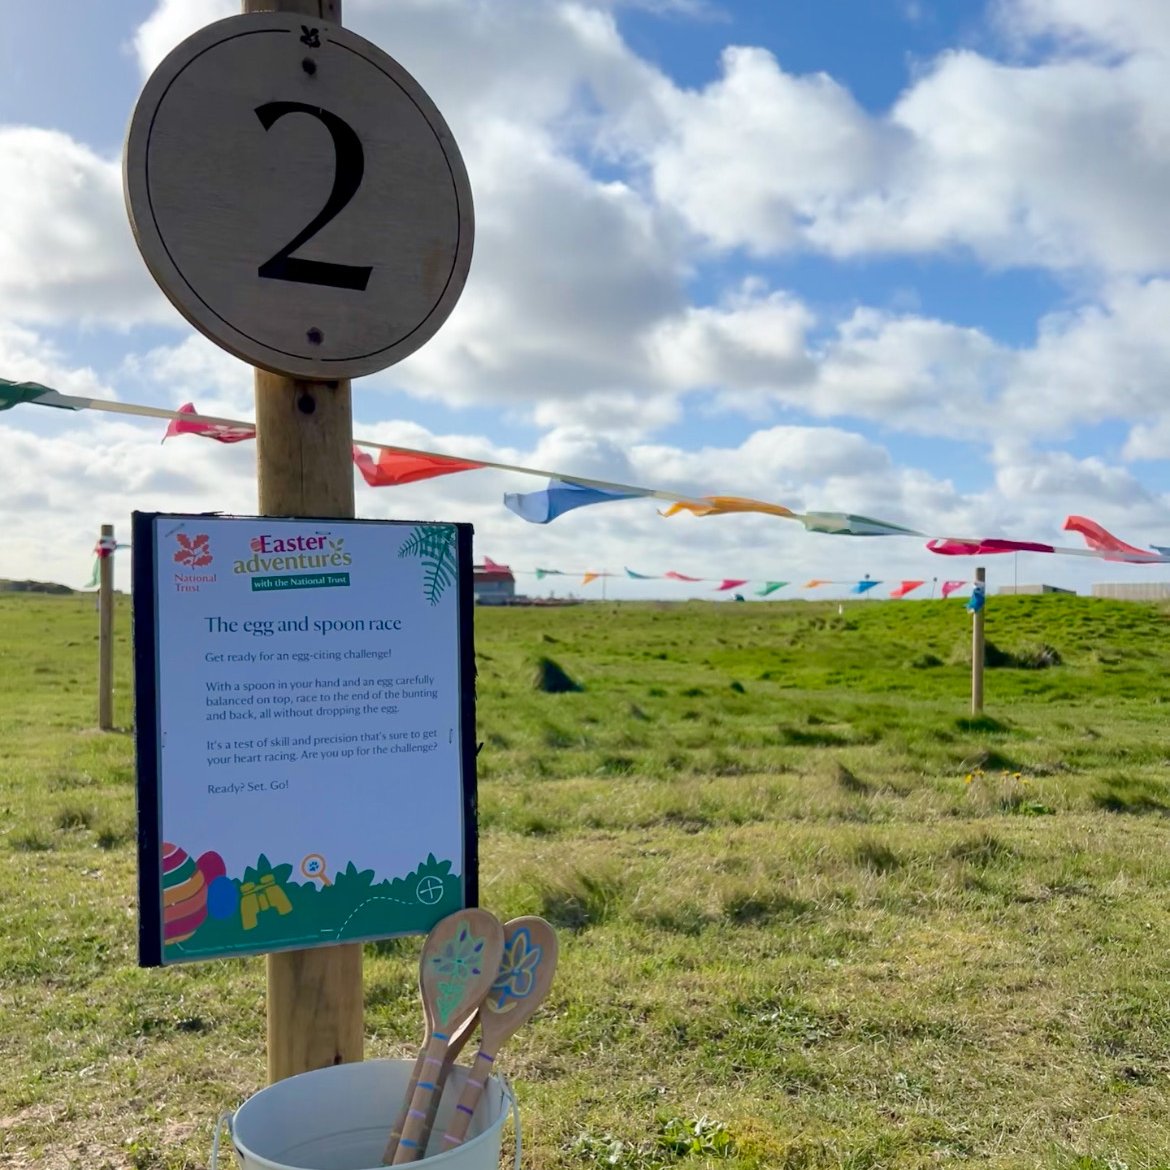 Our Easter Adventures trail is waiting for you at Sandilands🌿from now until Sunday 14 April, 10am-3pm🐣

Make your way along the trail and find nature-inspired activities for the whole family to enjoy🌼